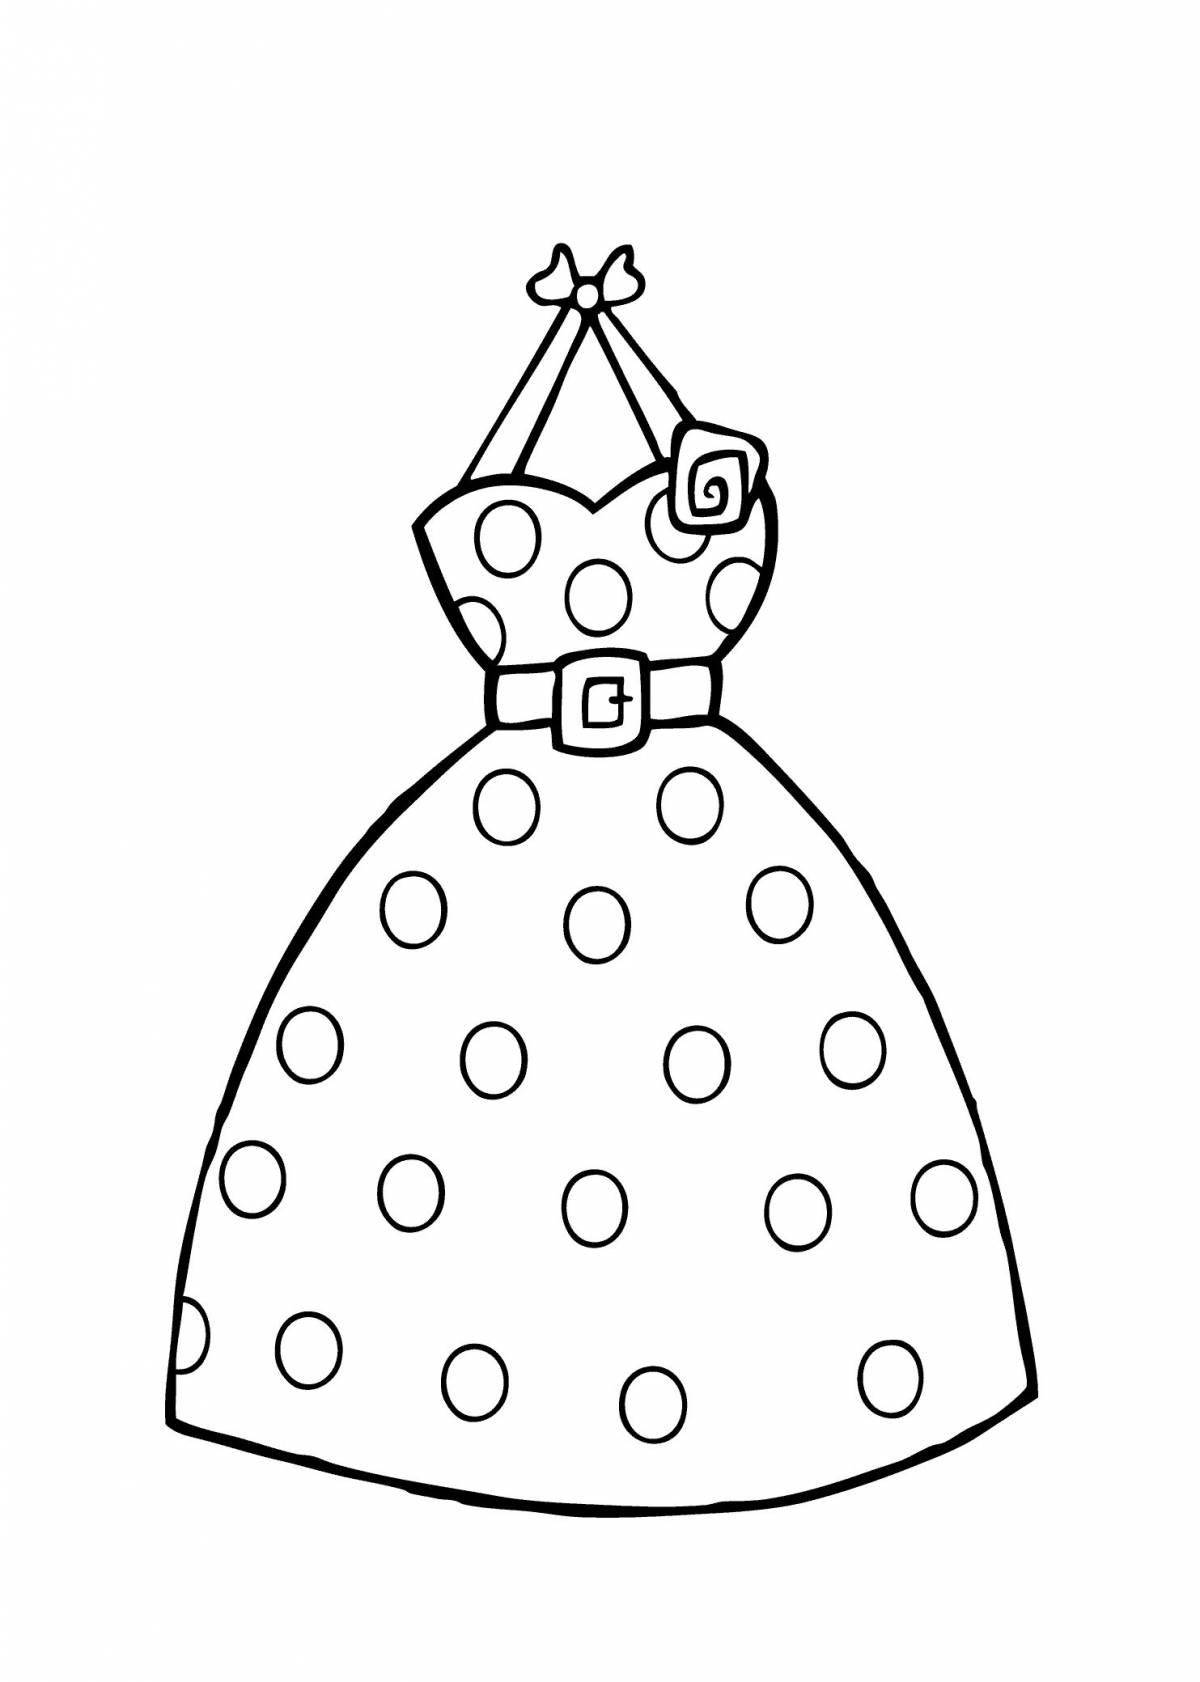 Gorgeous drawing of a dress for children